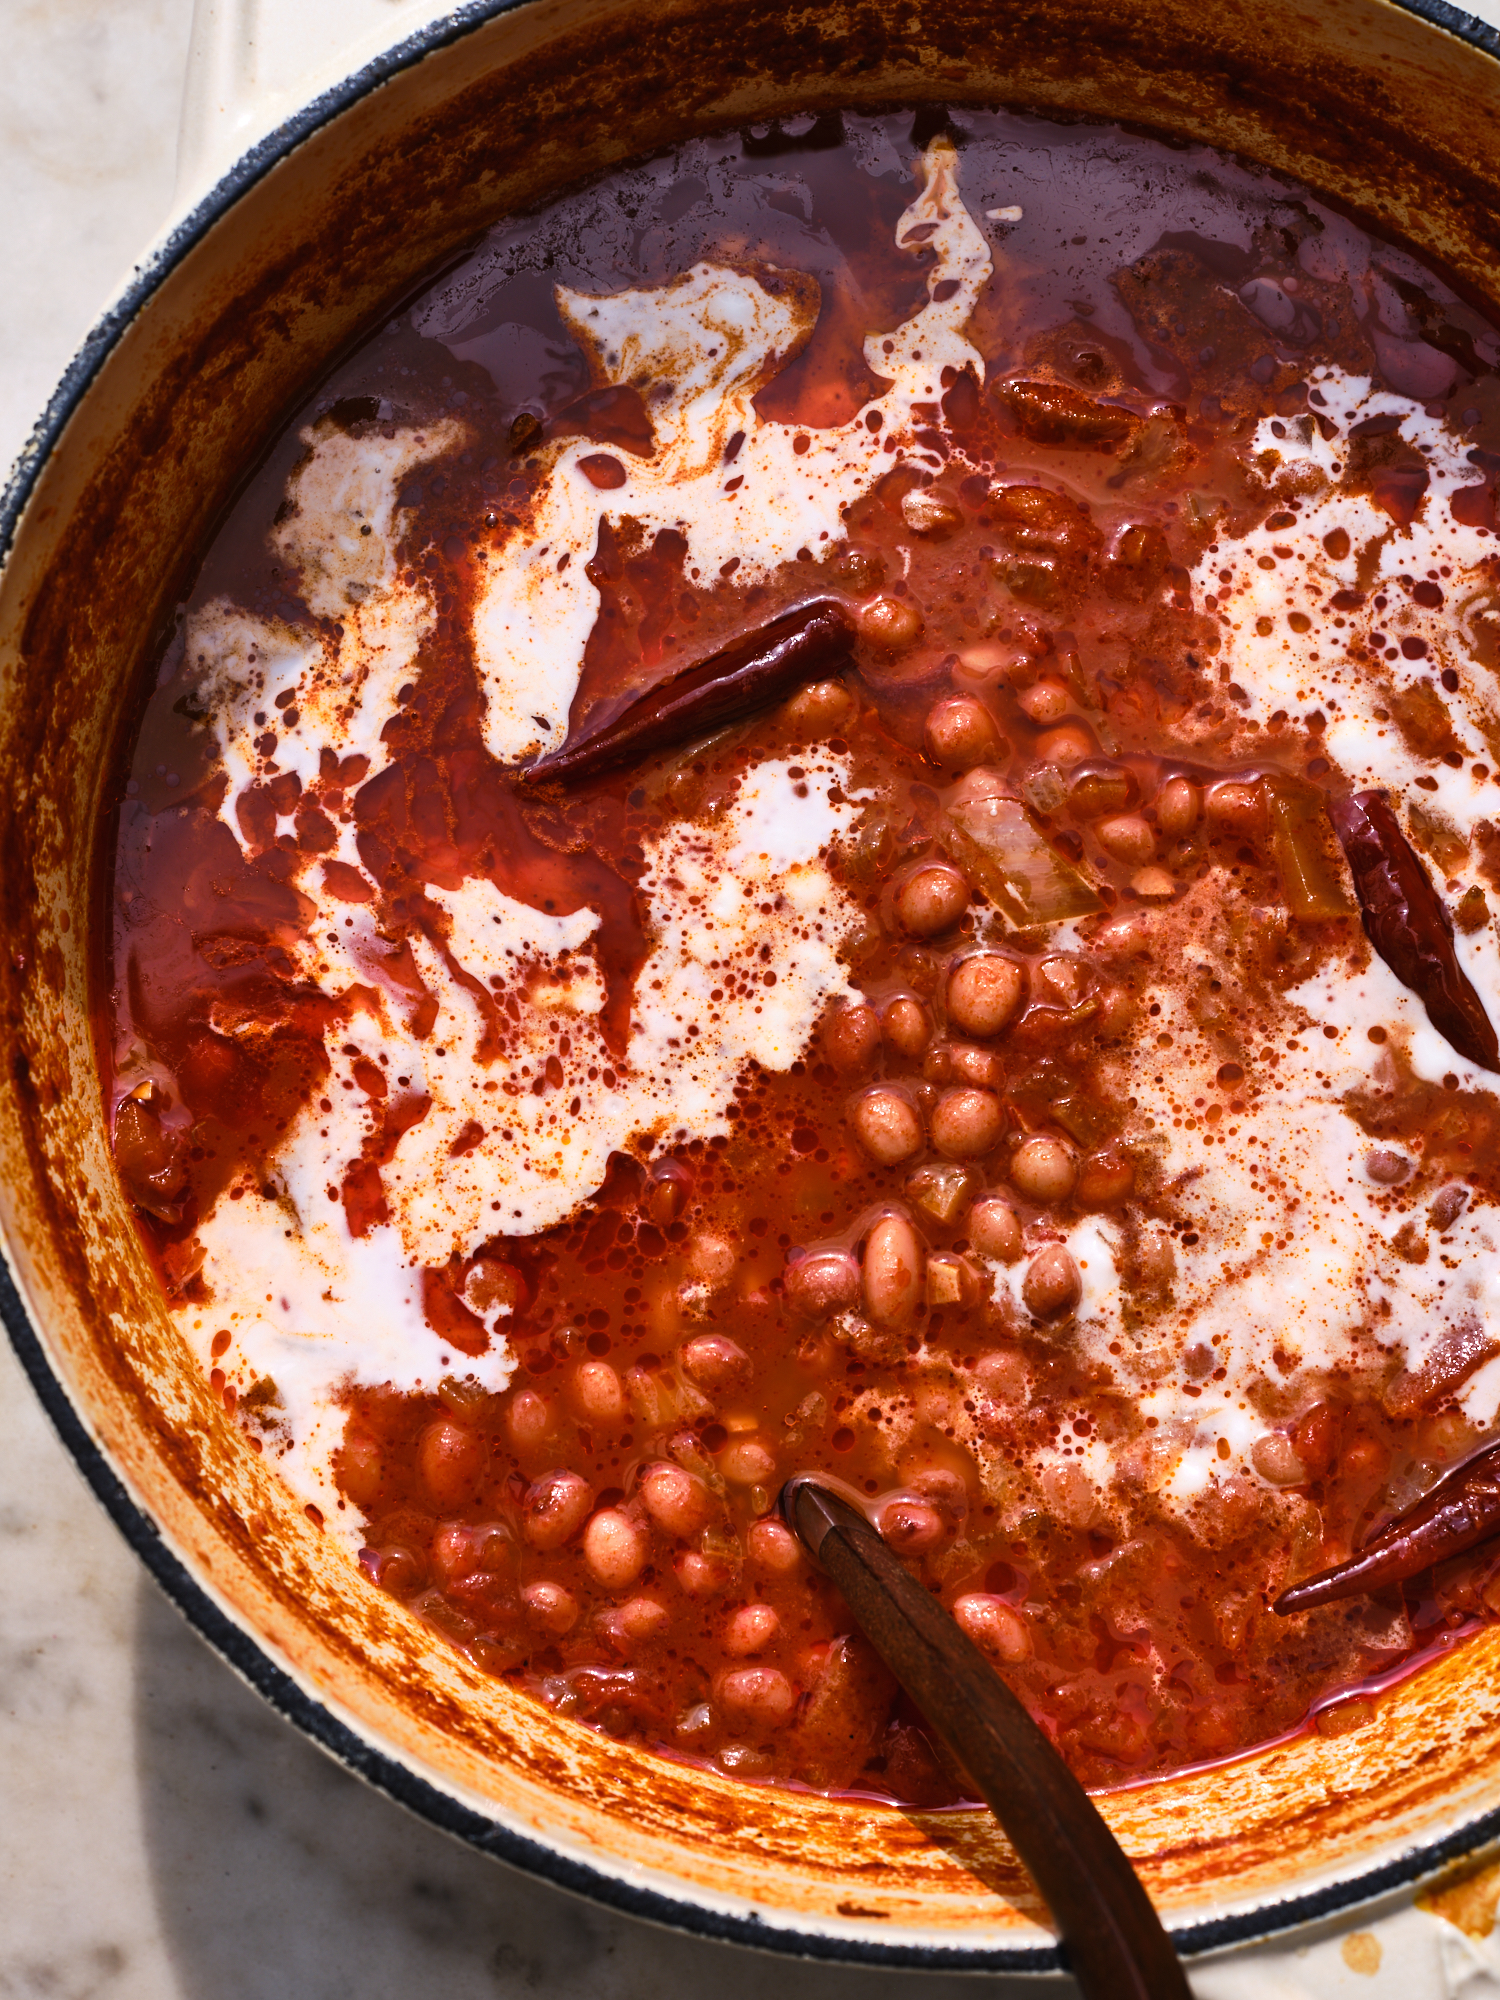 Chipotle Cinnamon Slow-Cooked Coconut Beans